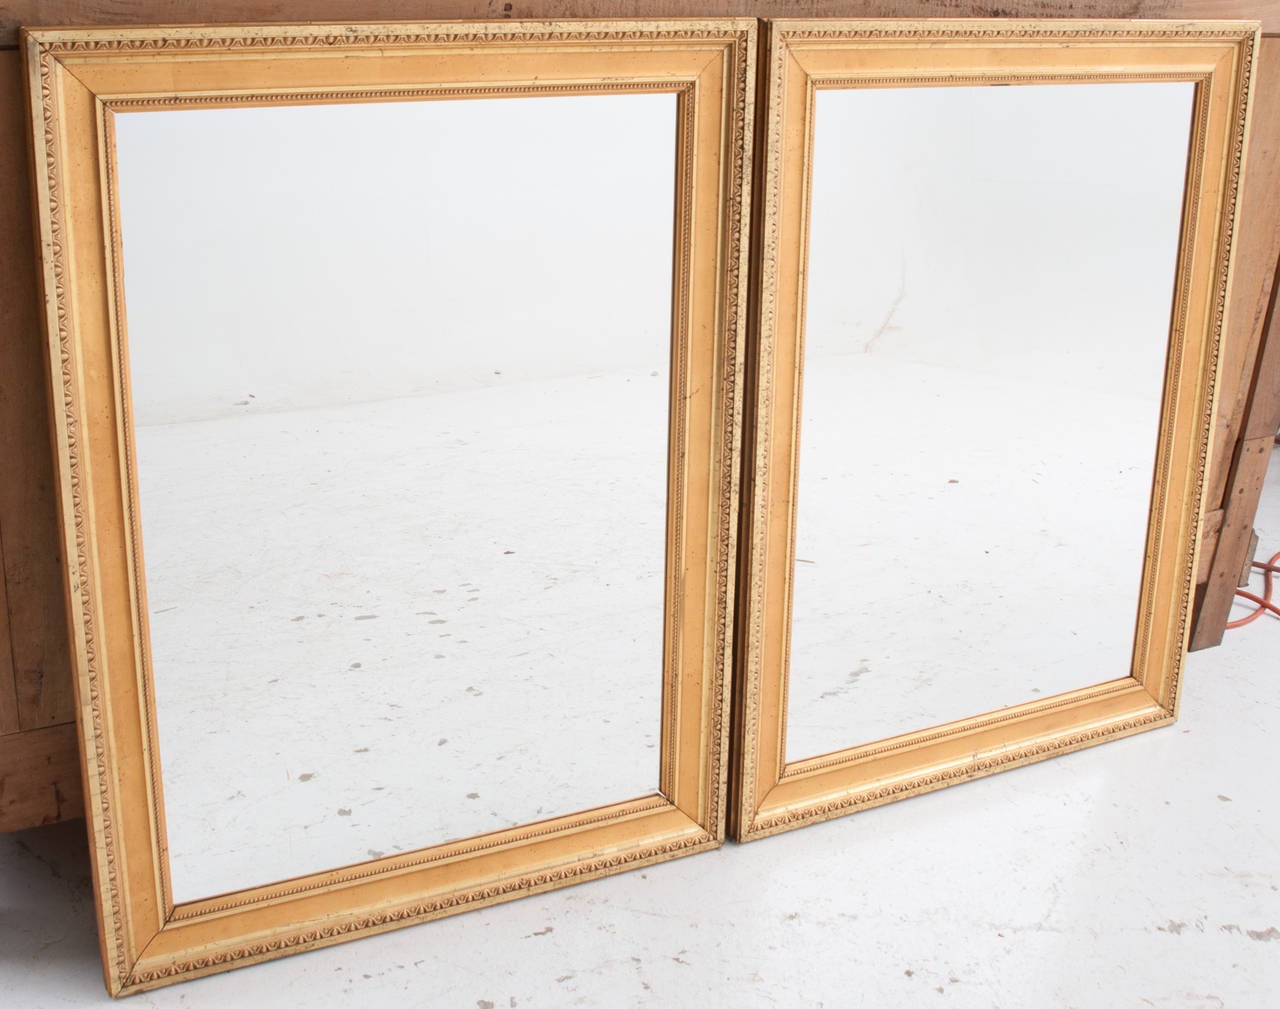 French pair of gold gilt symmetrical mirror frames from the later 1800s, both with new mirror glass.